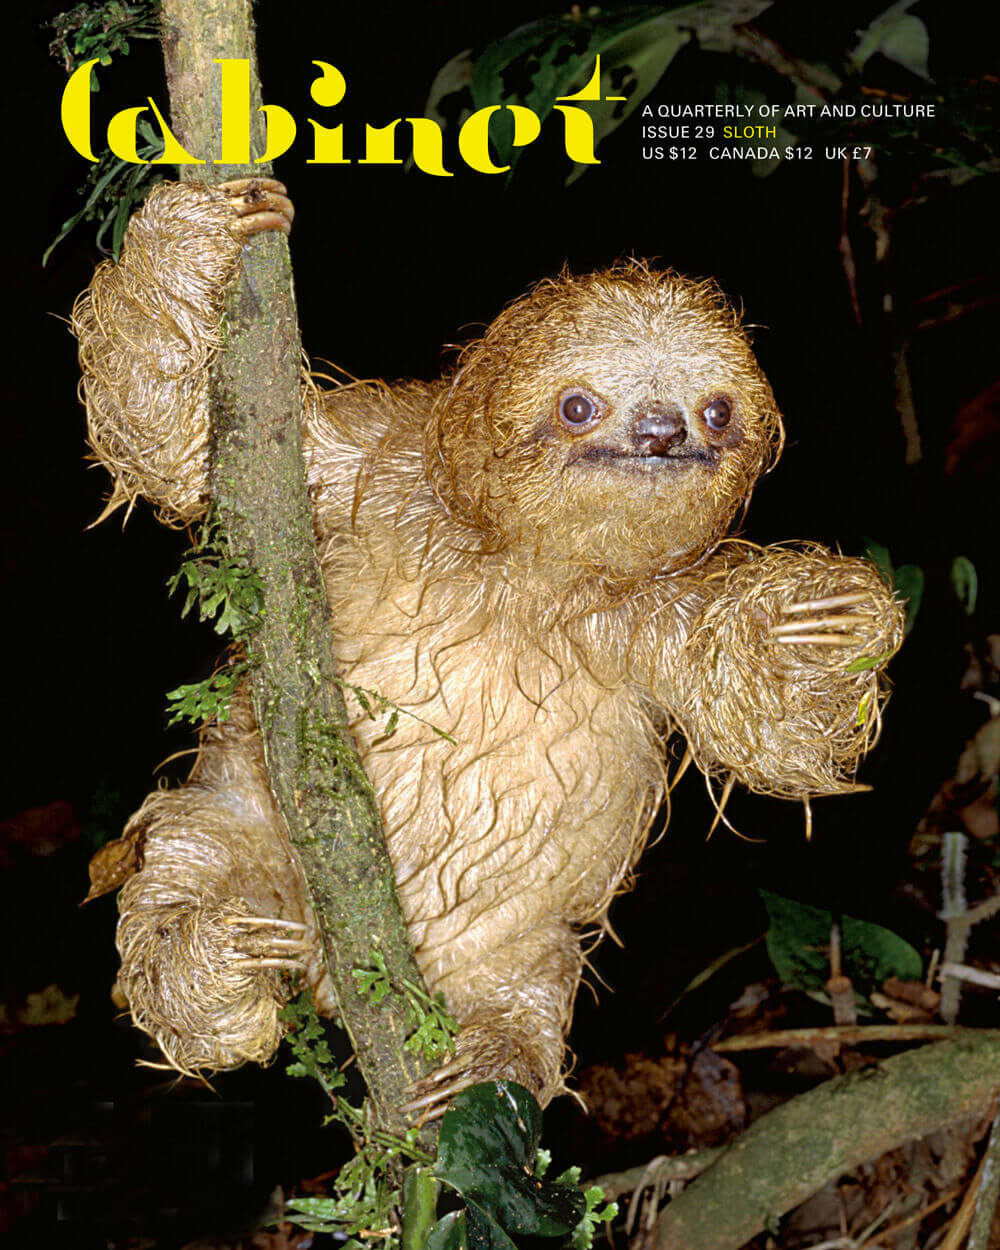 A photograph of a baby sloth found abandoned in the lowland tropical rain forest of La Selva Biological Station in Costa Rica.